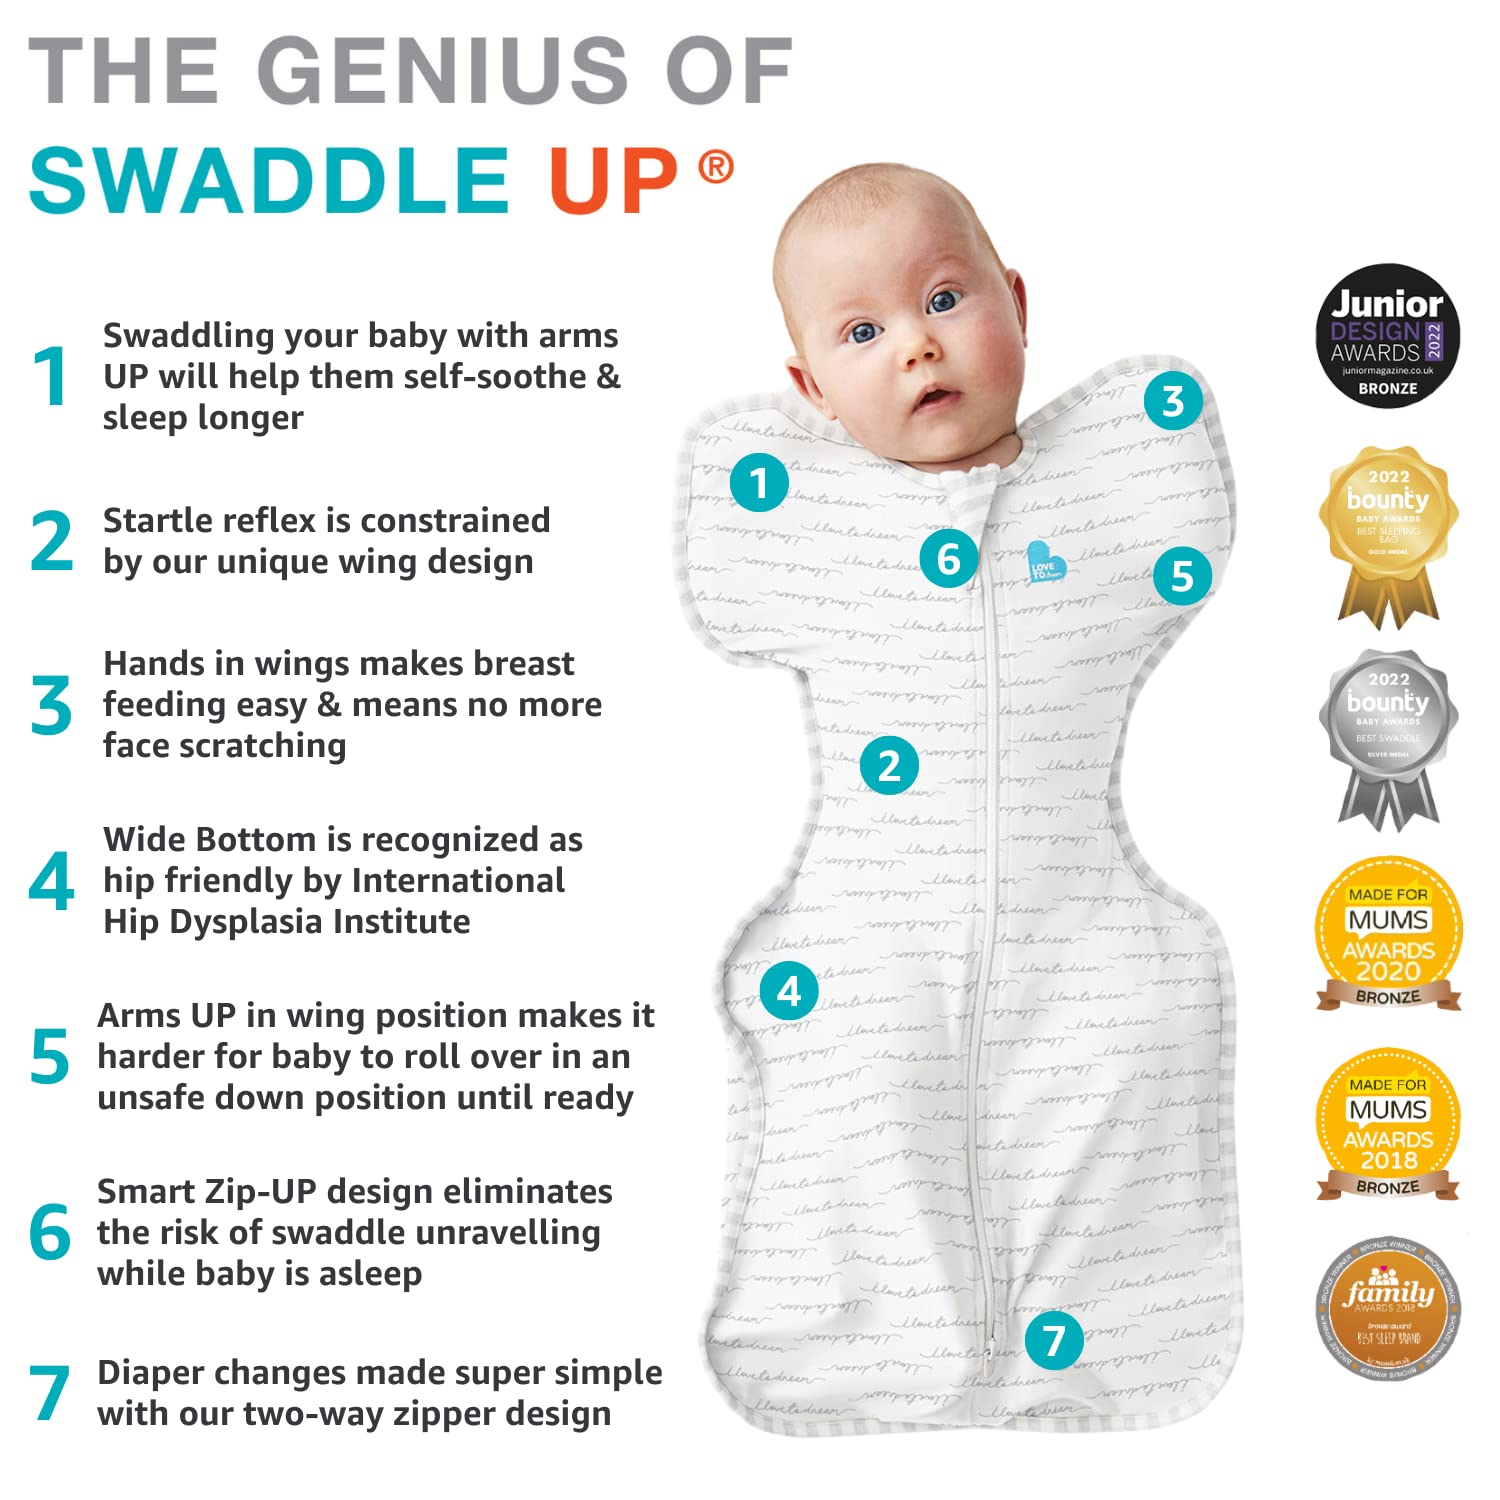 Love to Dream Swaddle UP Self-Soothing Sleep Sack 8-13 lbs, Dramatically Better Sleep, Snug Fit Calms Startle Reflex, 1.0 TOG, Gray, Small